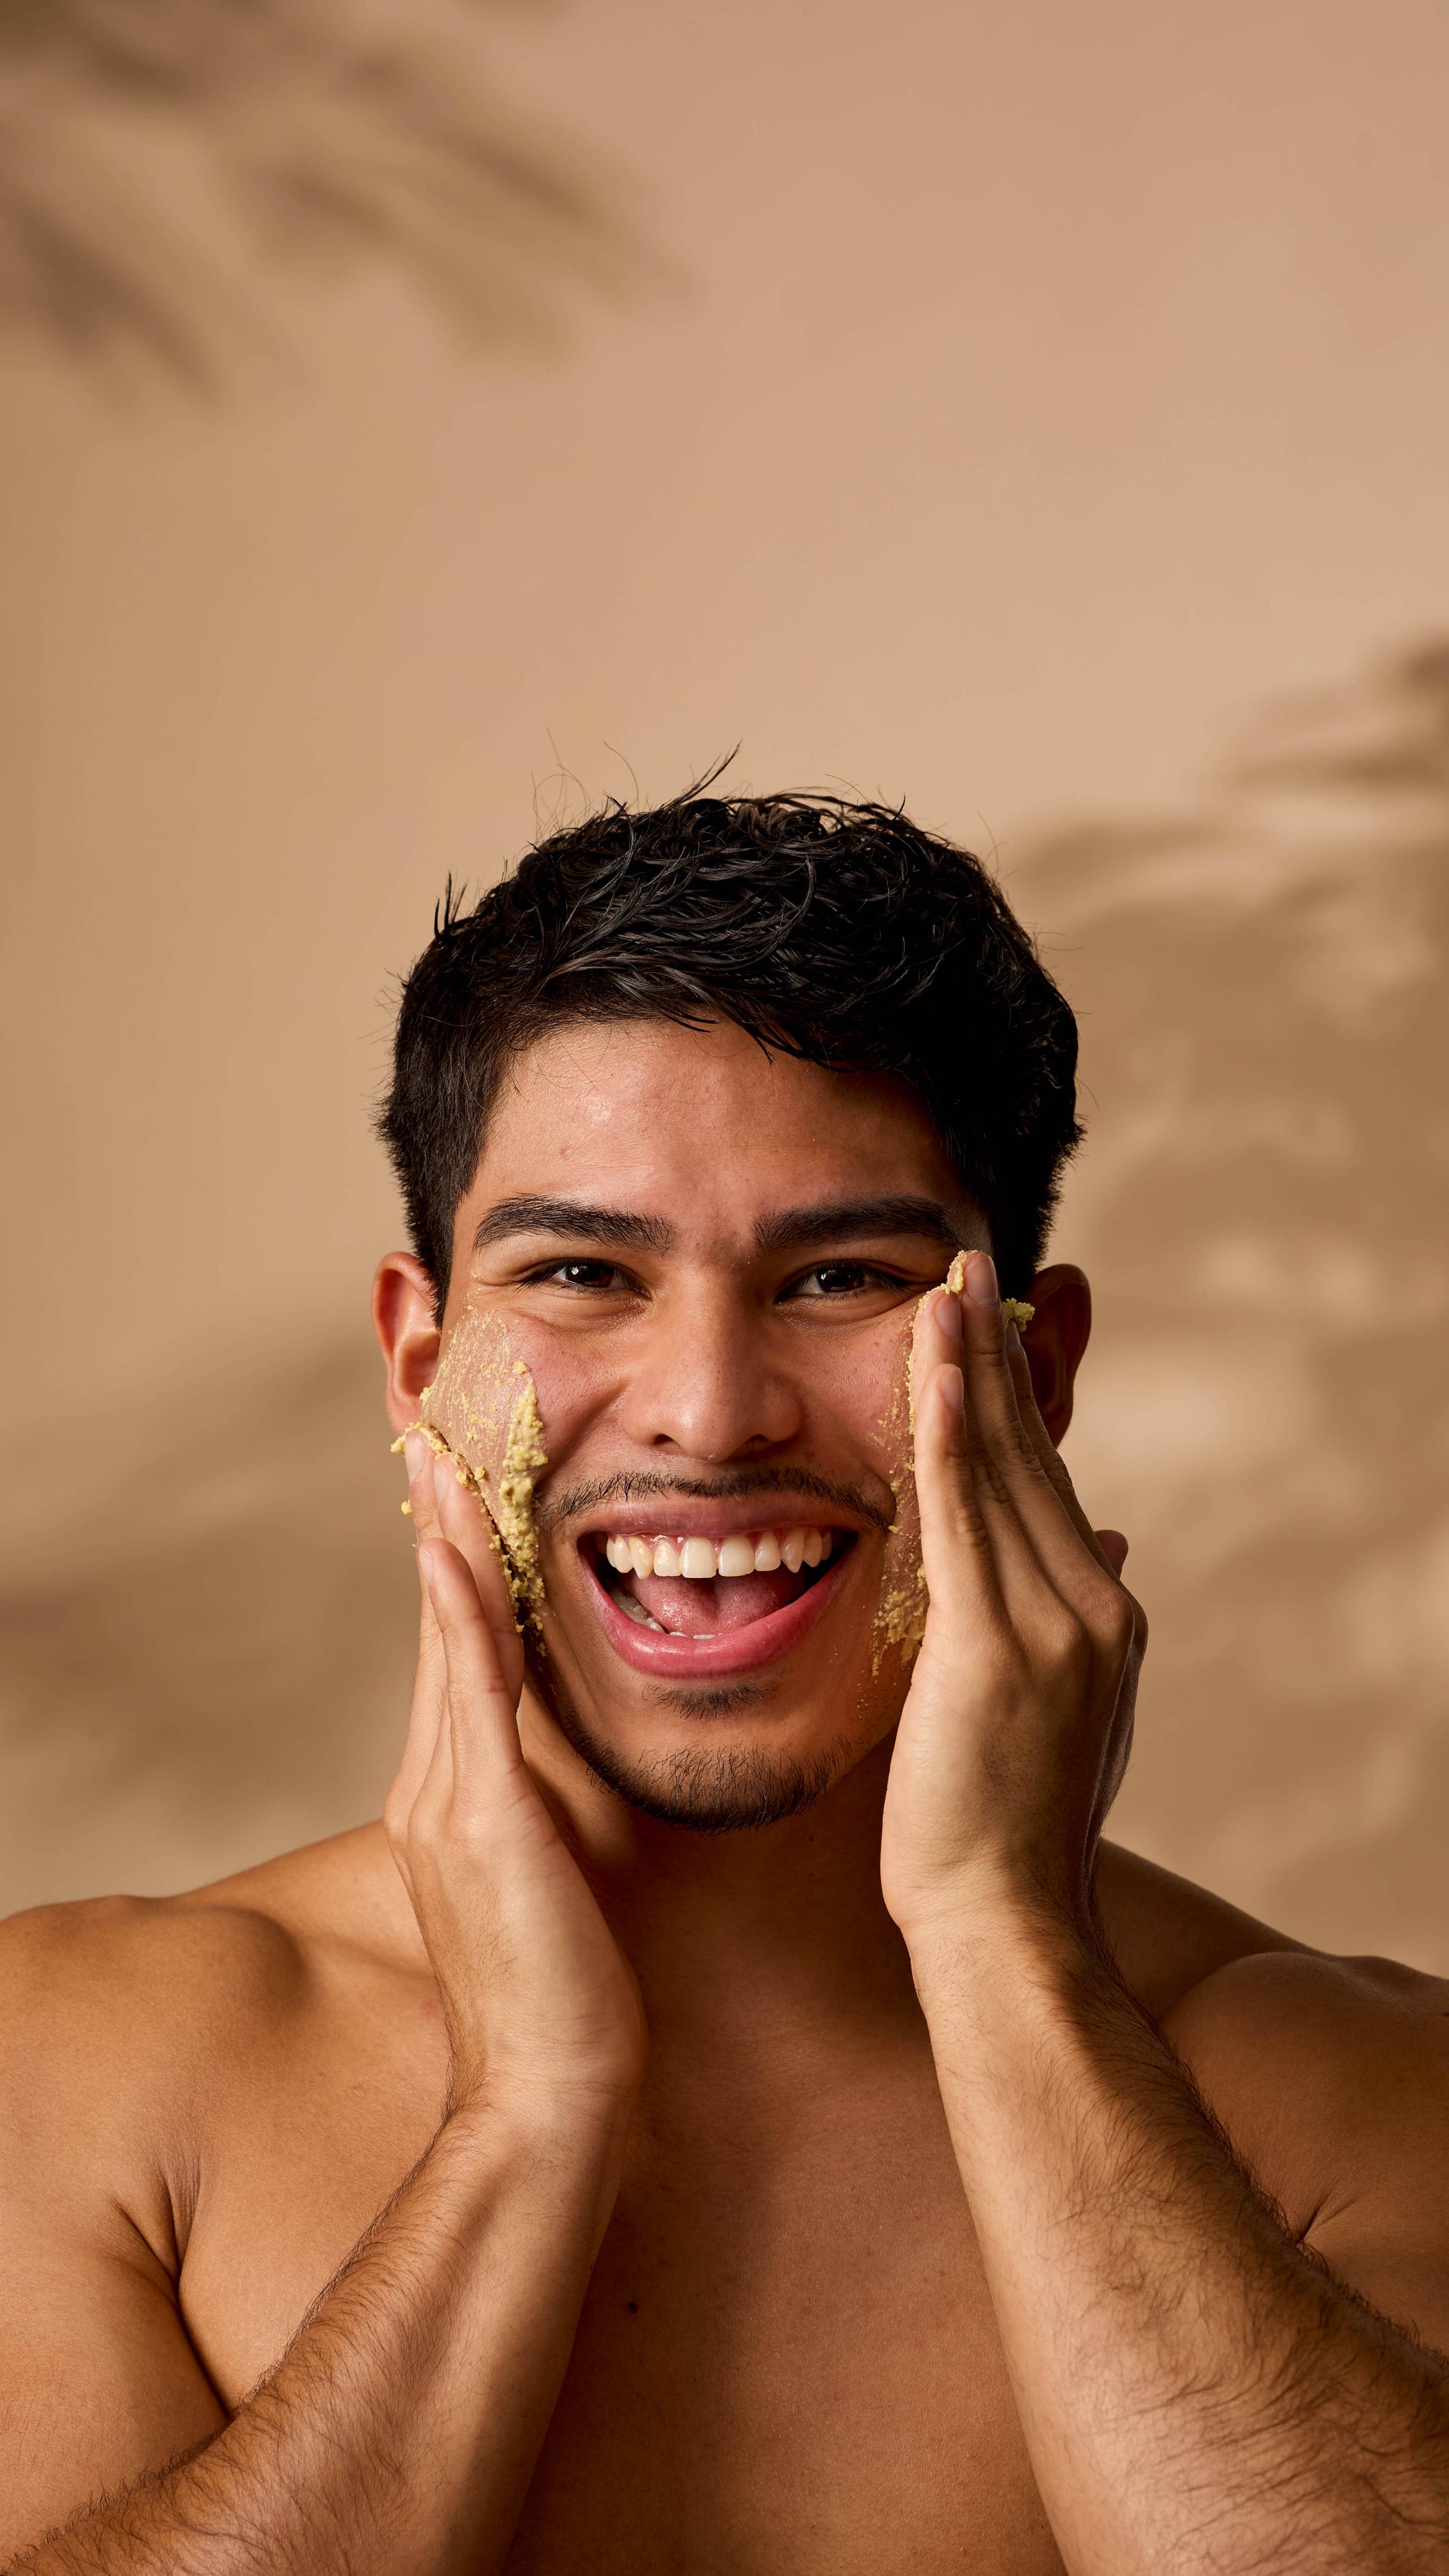 The model is smiling and looking forward as they apply the Turmeric Roll cleanser to both cheeks under warm lighting. 